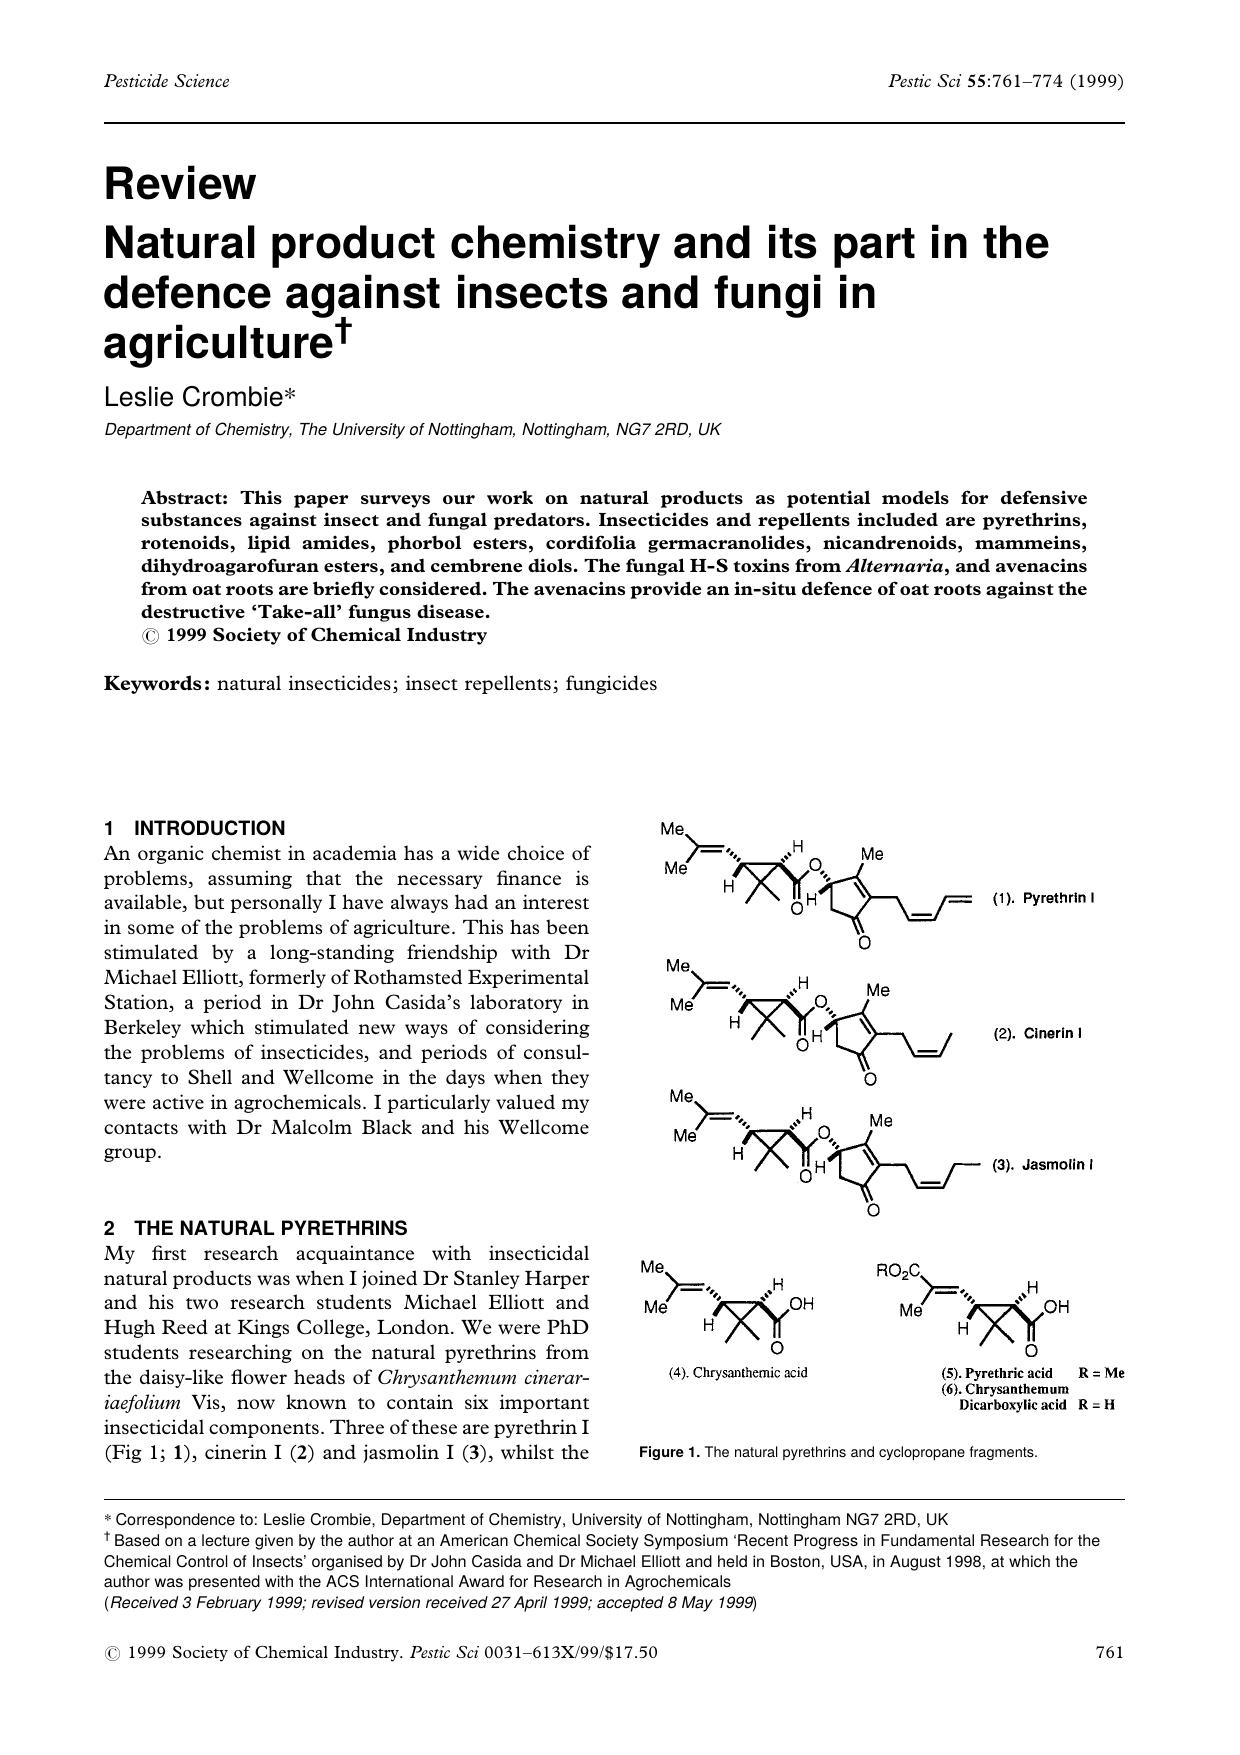 Natural product chemistry and its part in the defence against insects and fungi in agriculture by Unknown